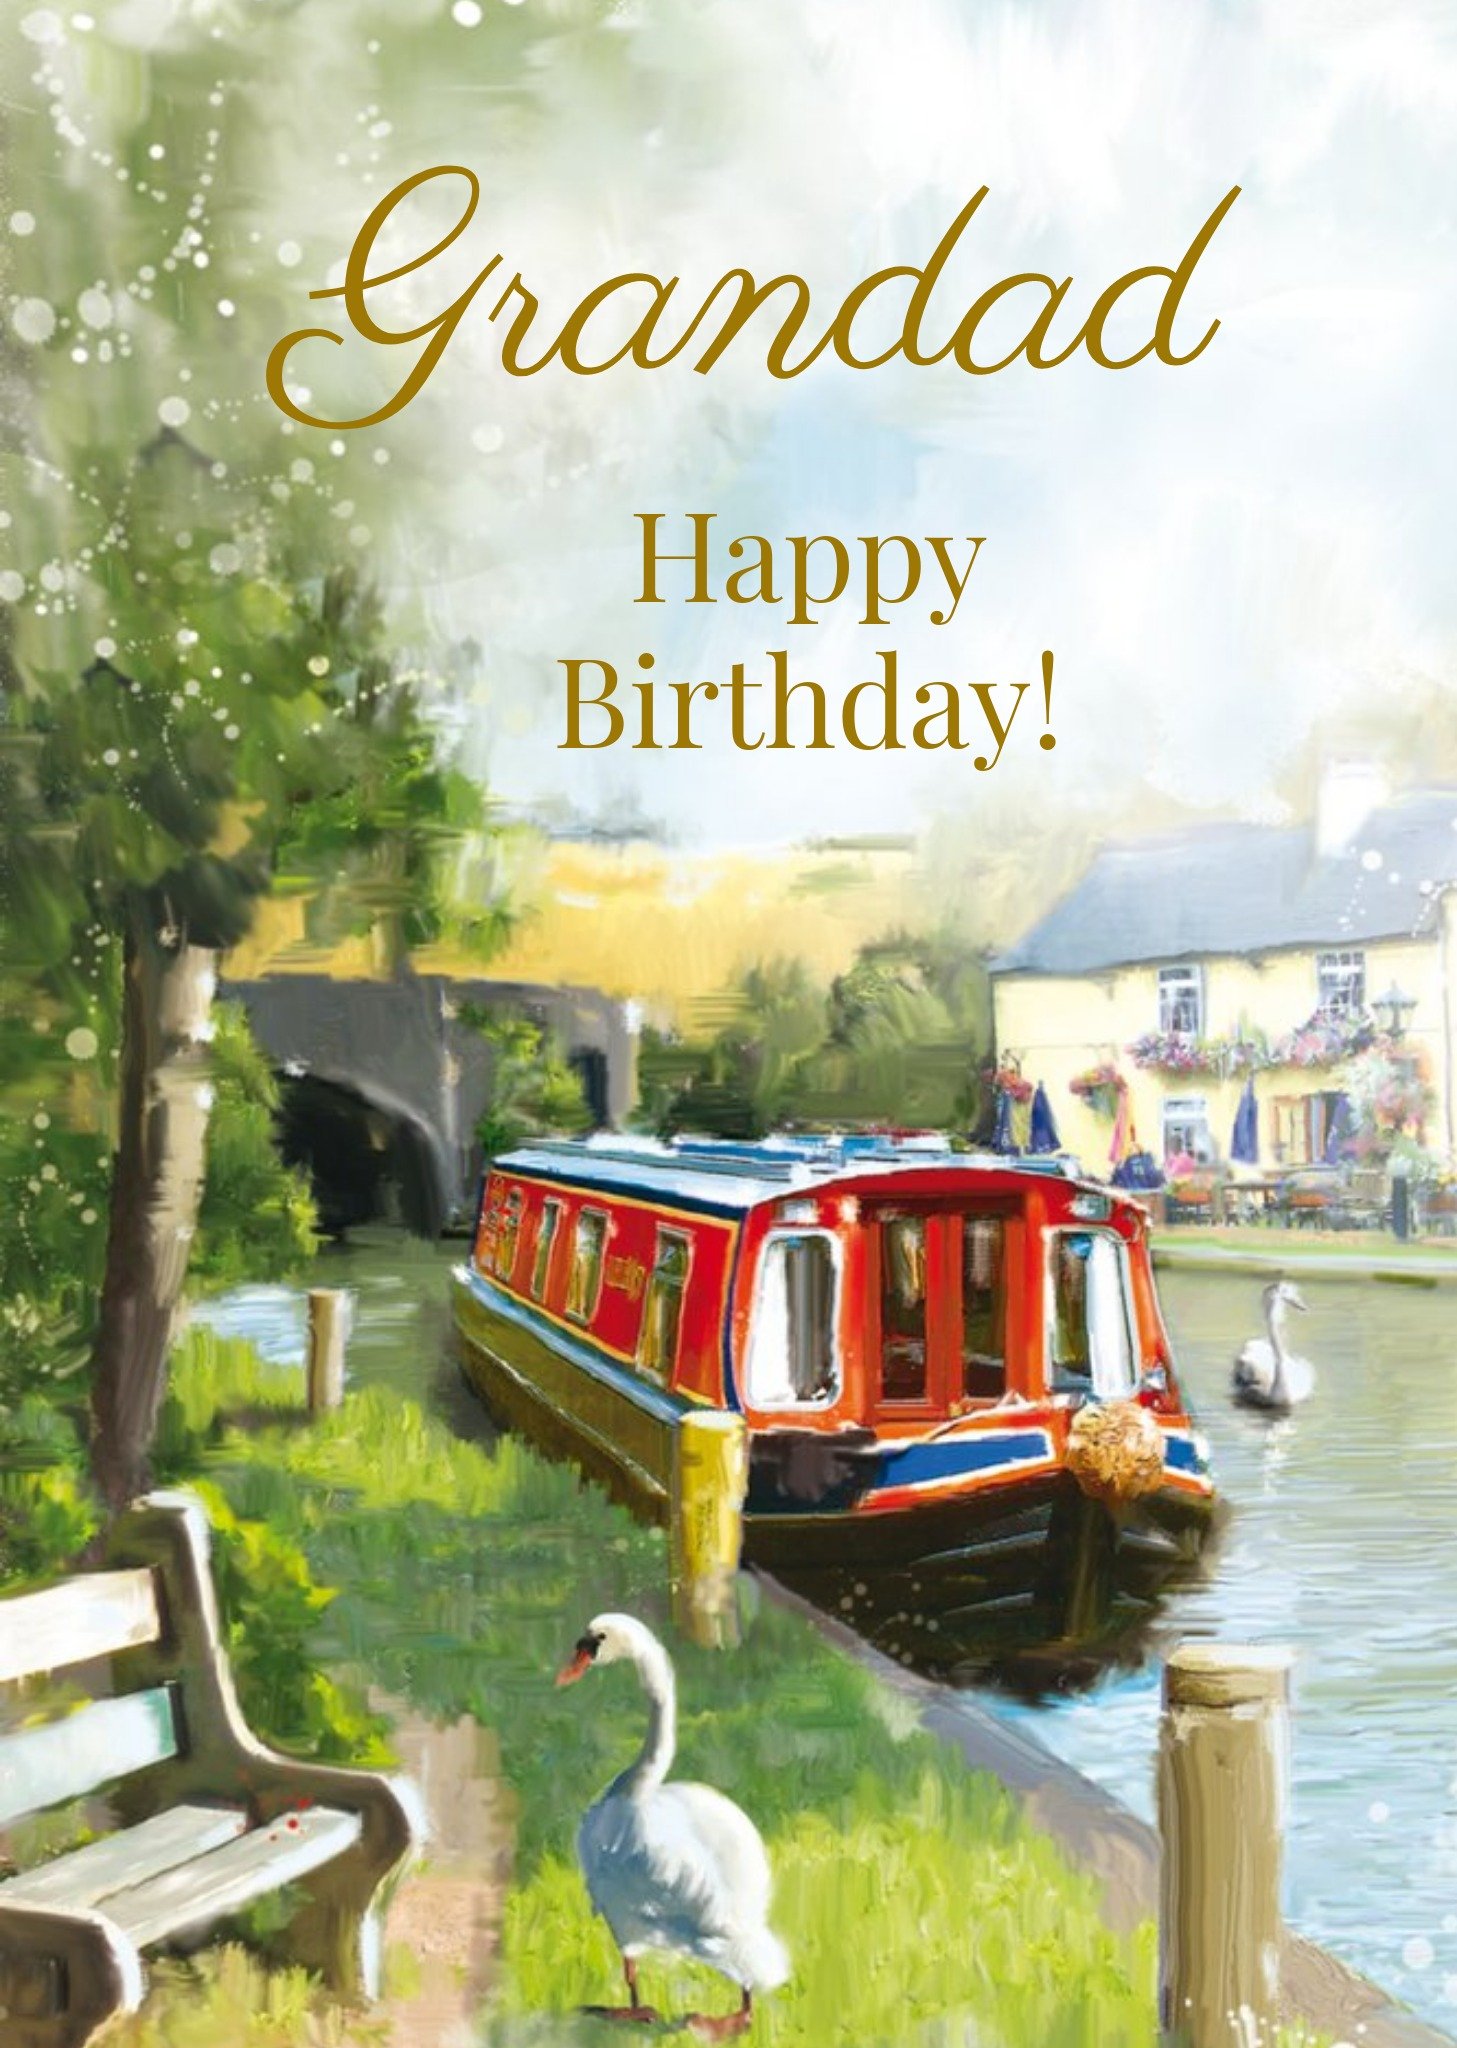 Ling Design Summertime On The Canal Happy Birthday Card For Grandad Ecard